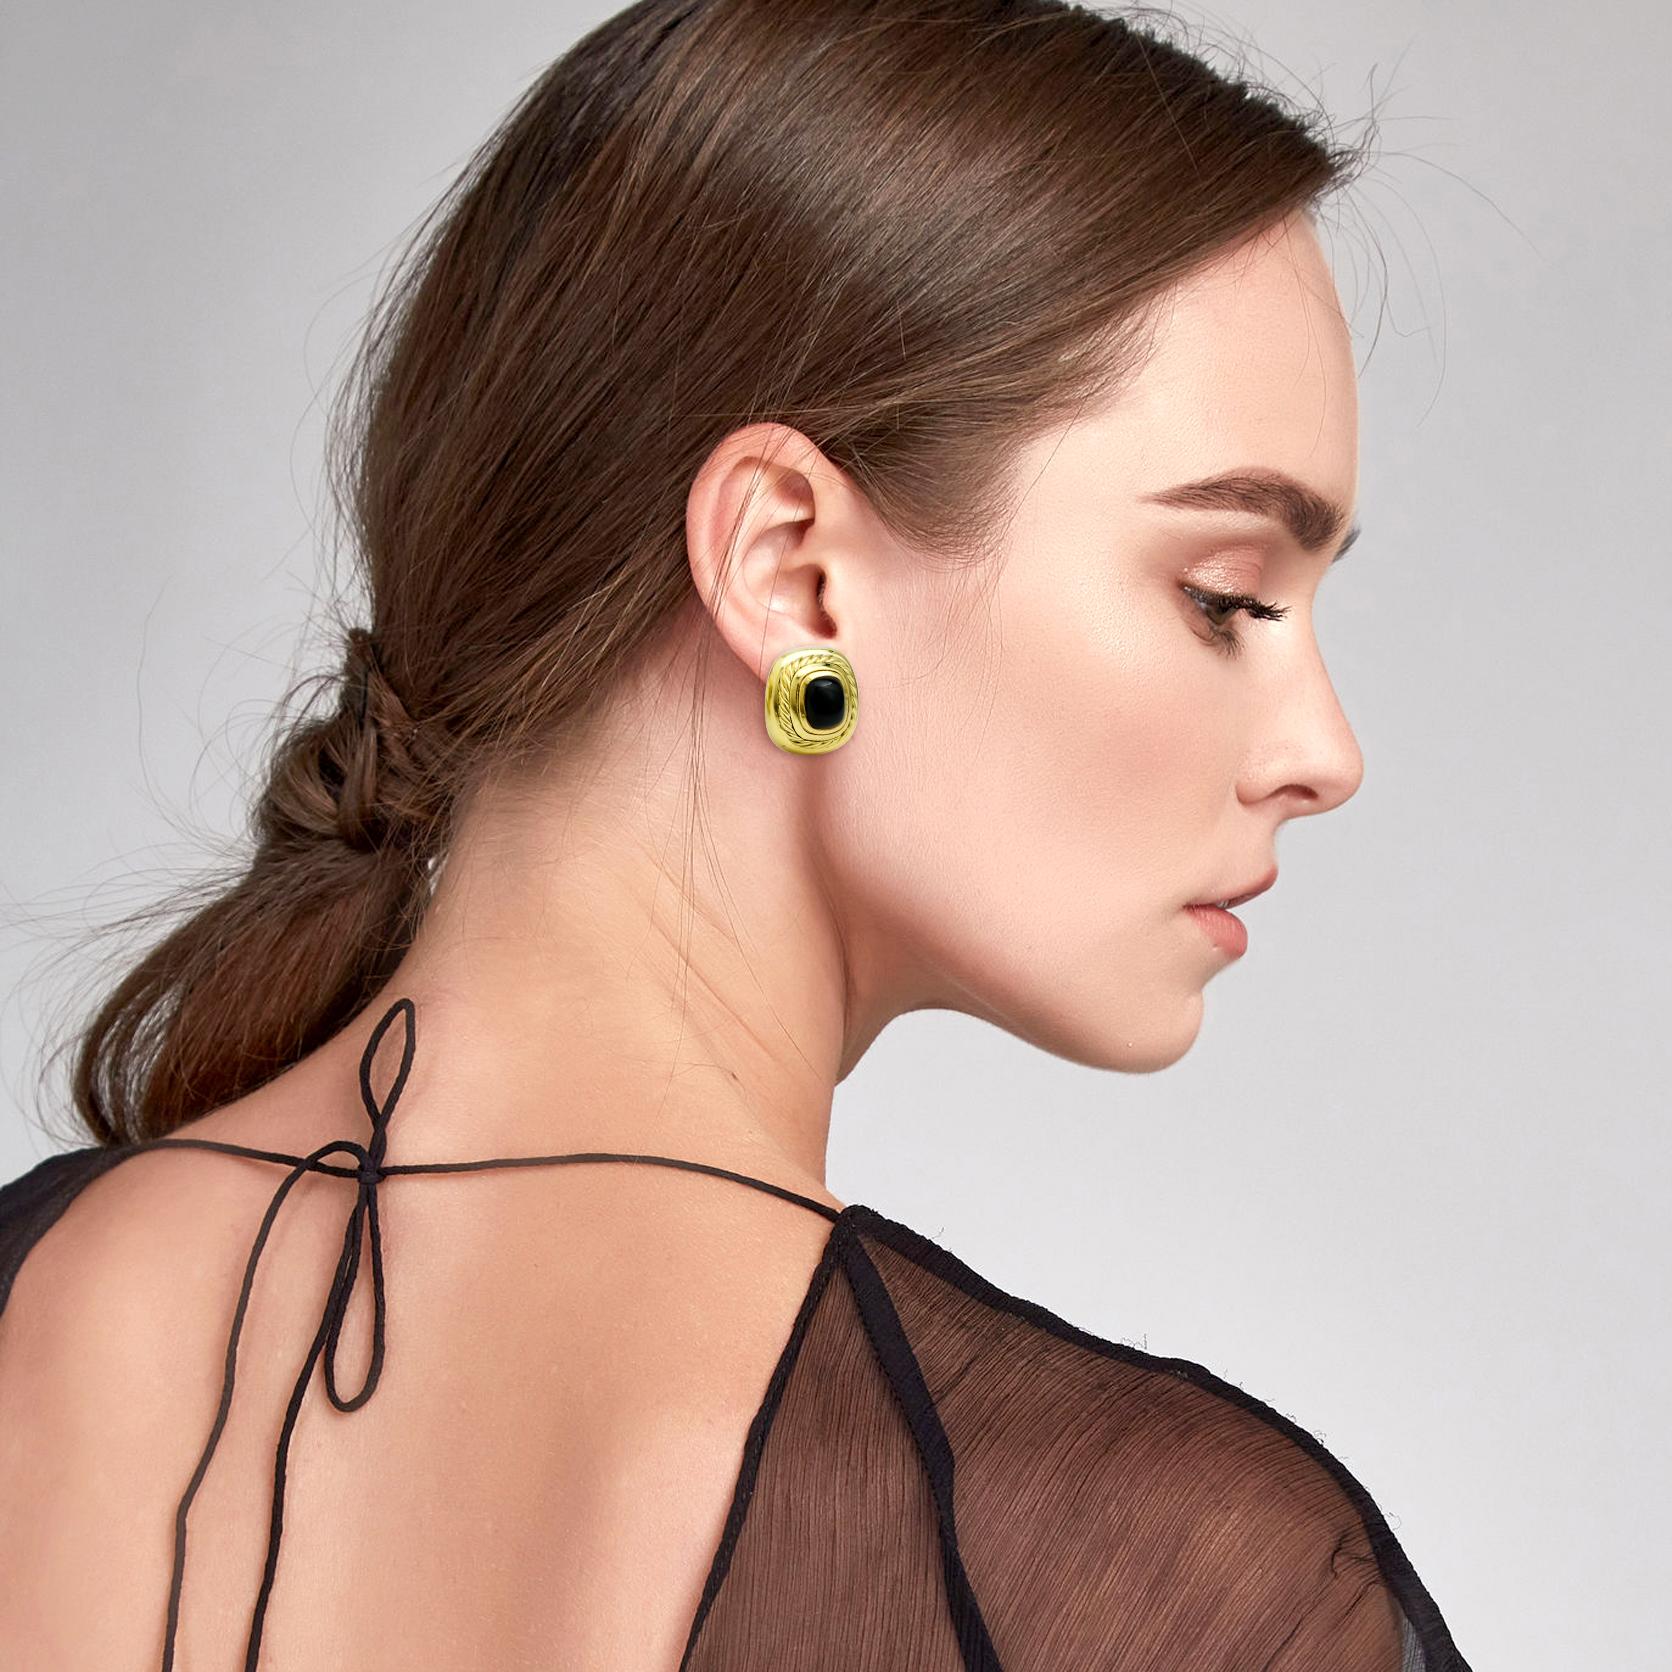 Vintage David Yurman stud earrings crafted in 18k yellow gold with a cabochon-cut black onyx center. From the Albion collection. Omega backs.